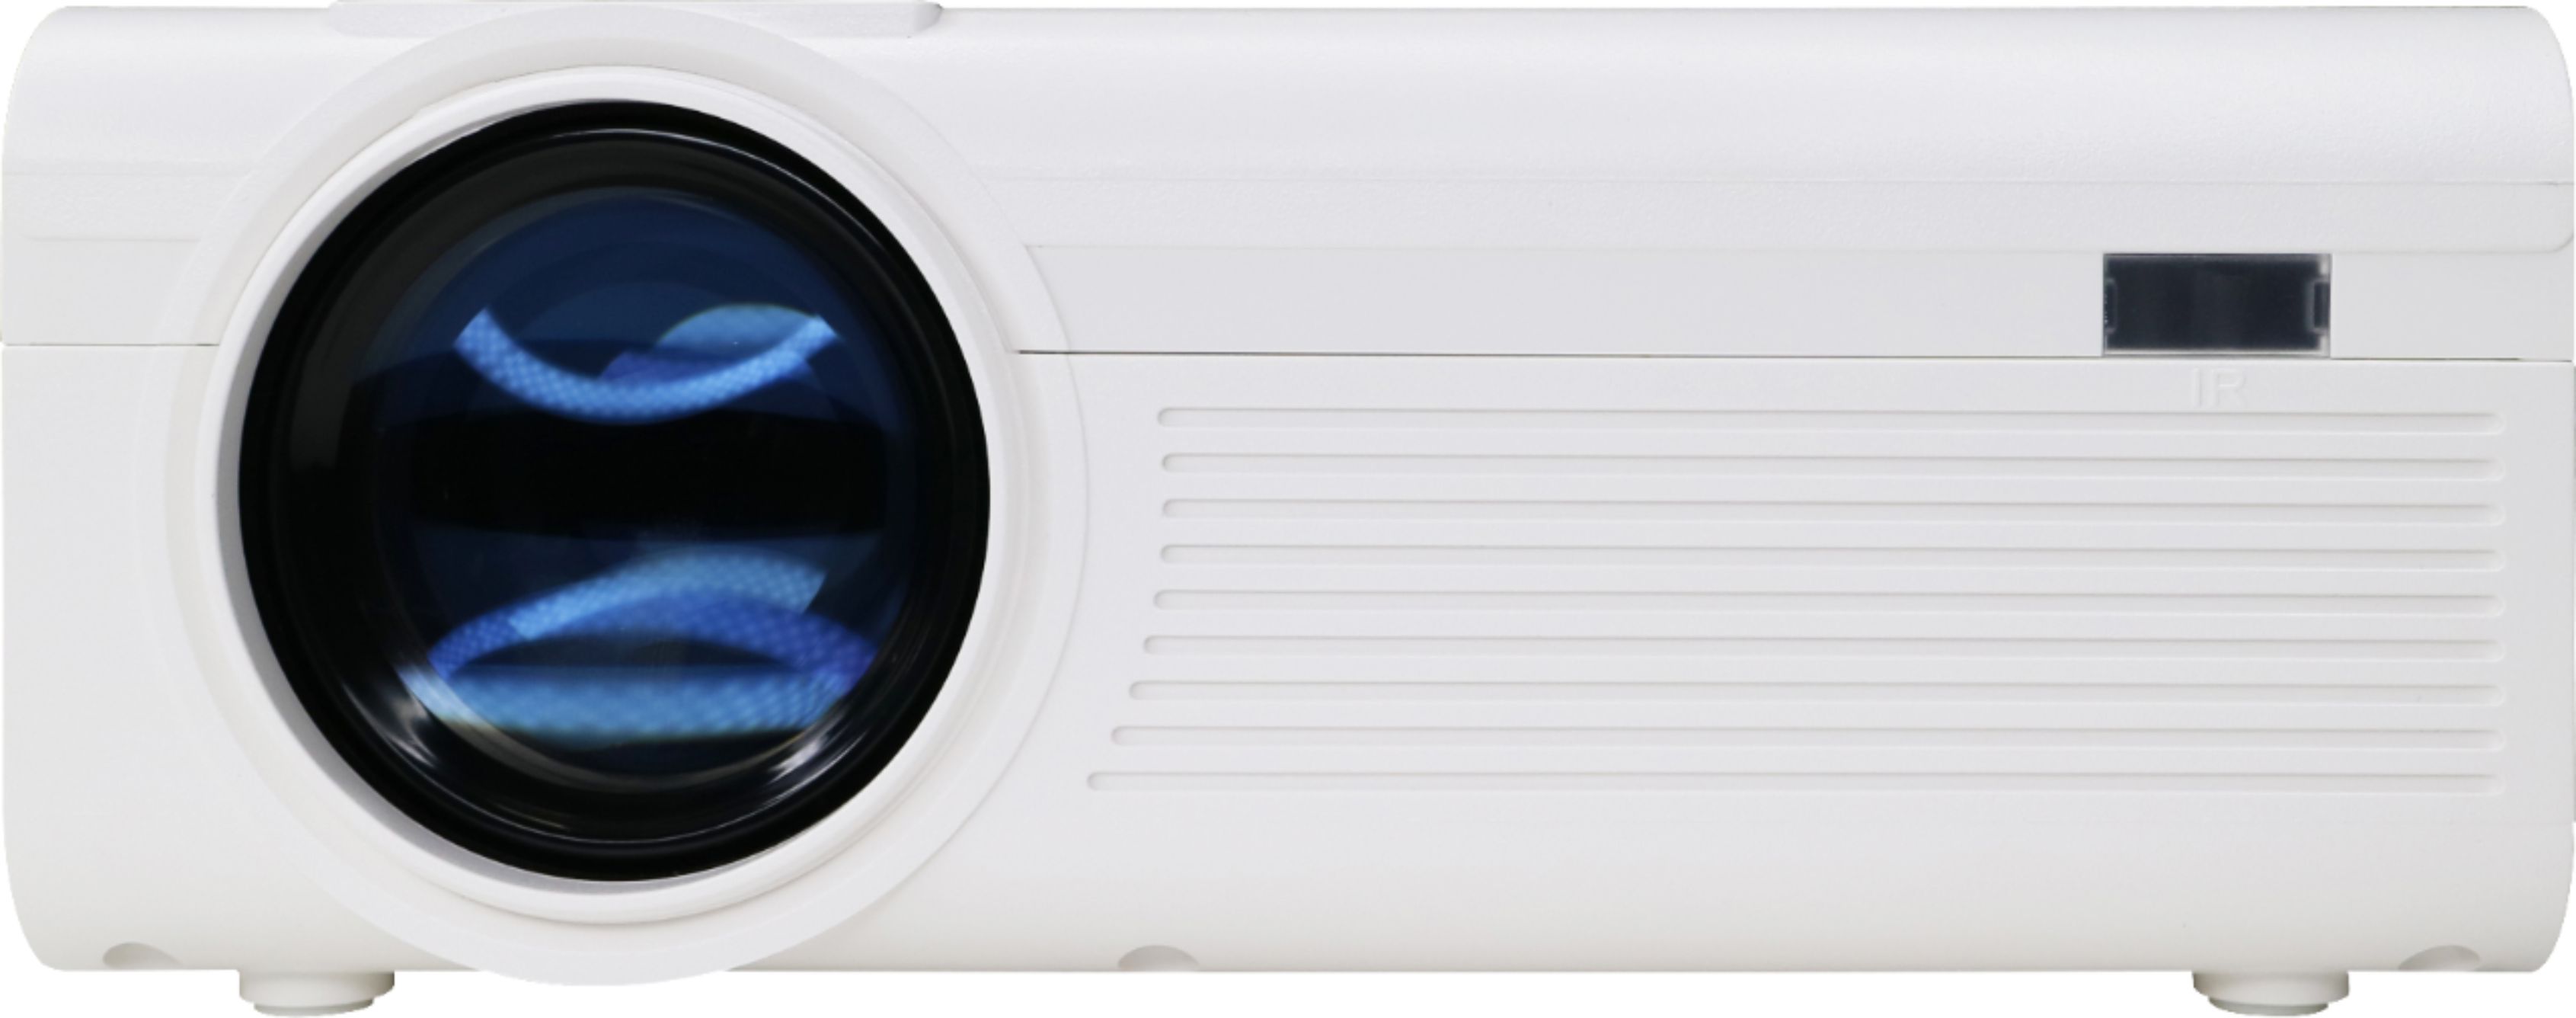 Ematic Epj590wh Lcd Projector White Epj590wh Best Buy